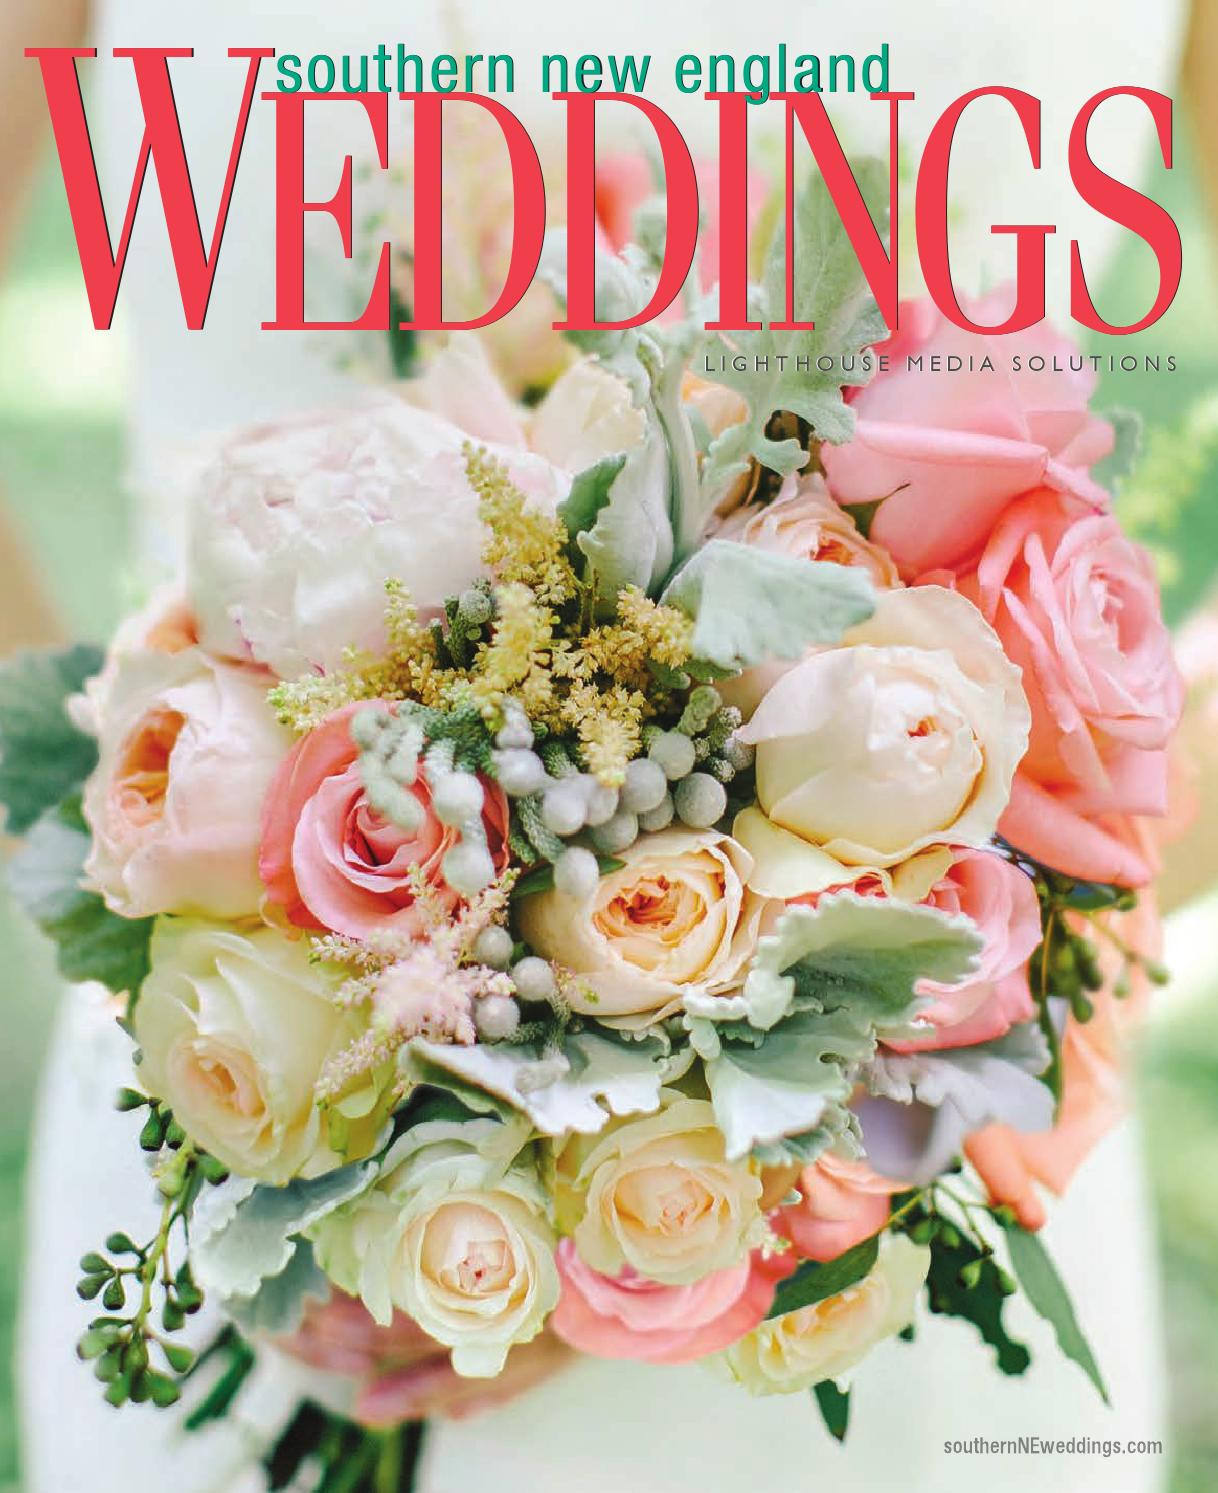 20 Elegant 16 Inch Trumpet Vase 2024 free download 16 inch trumpet vase of southern new england weddings 2015 by lighthouse media solutions issuu in page 1